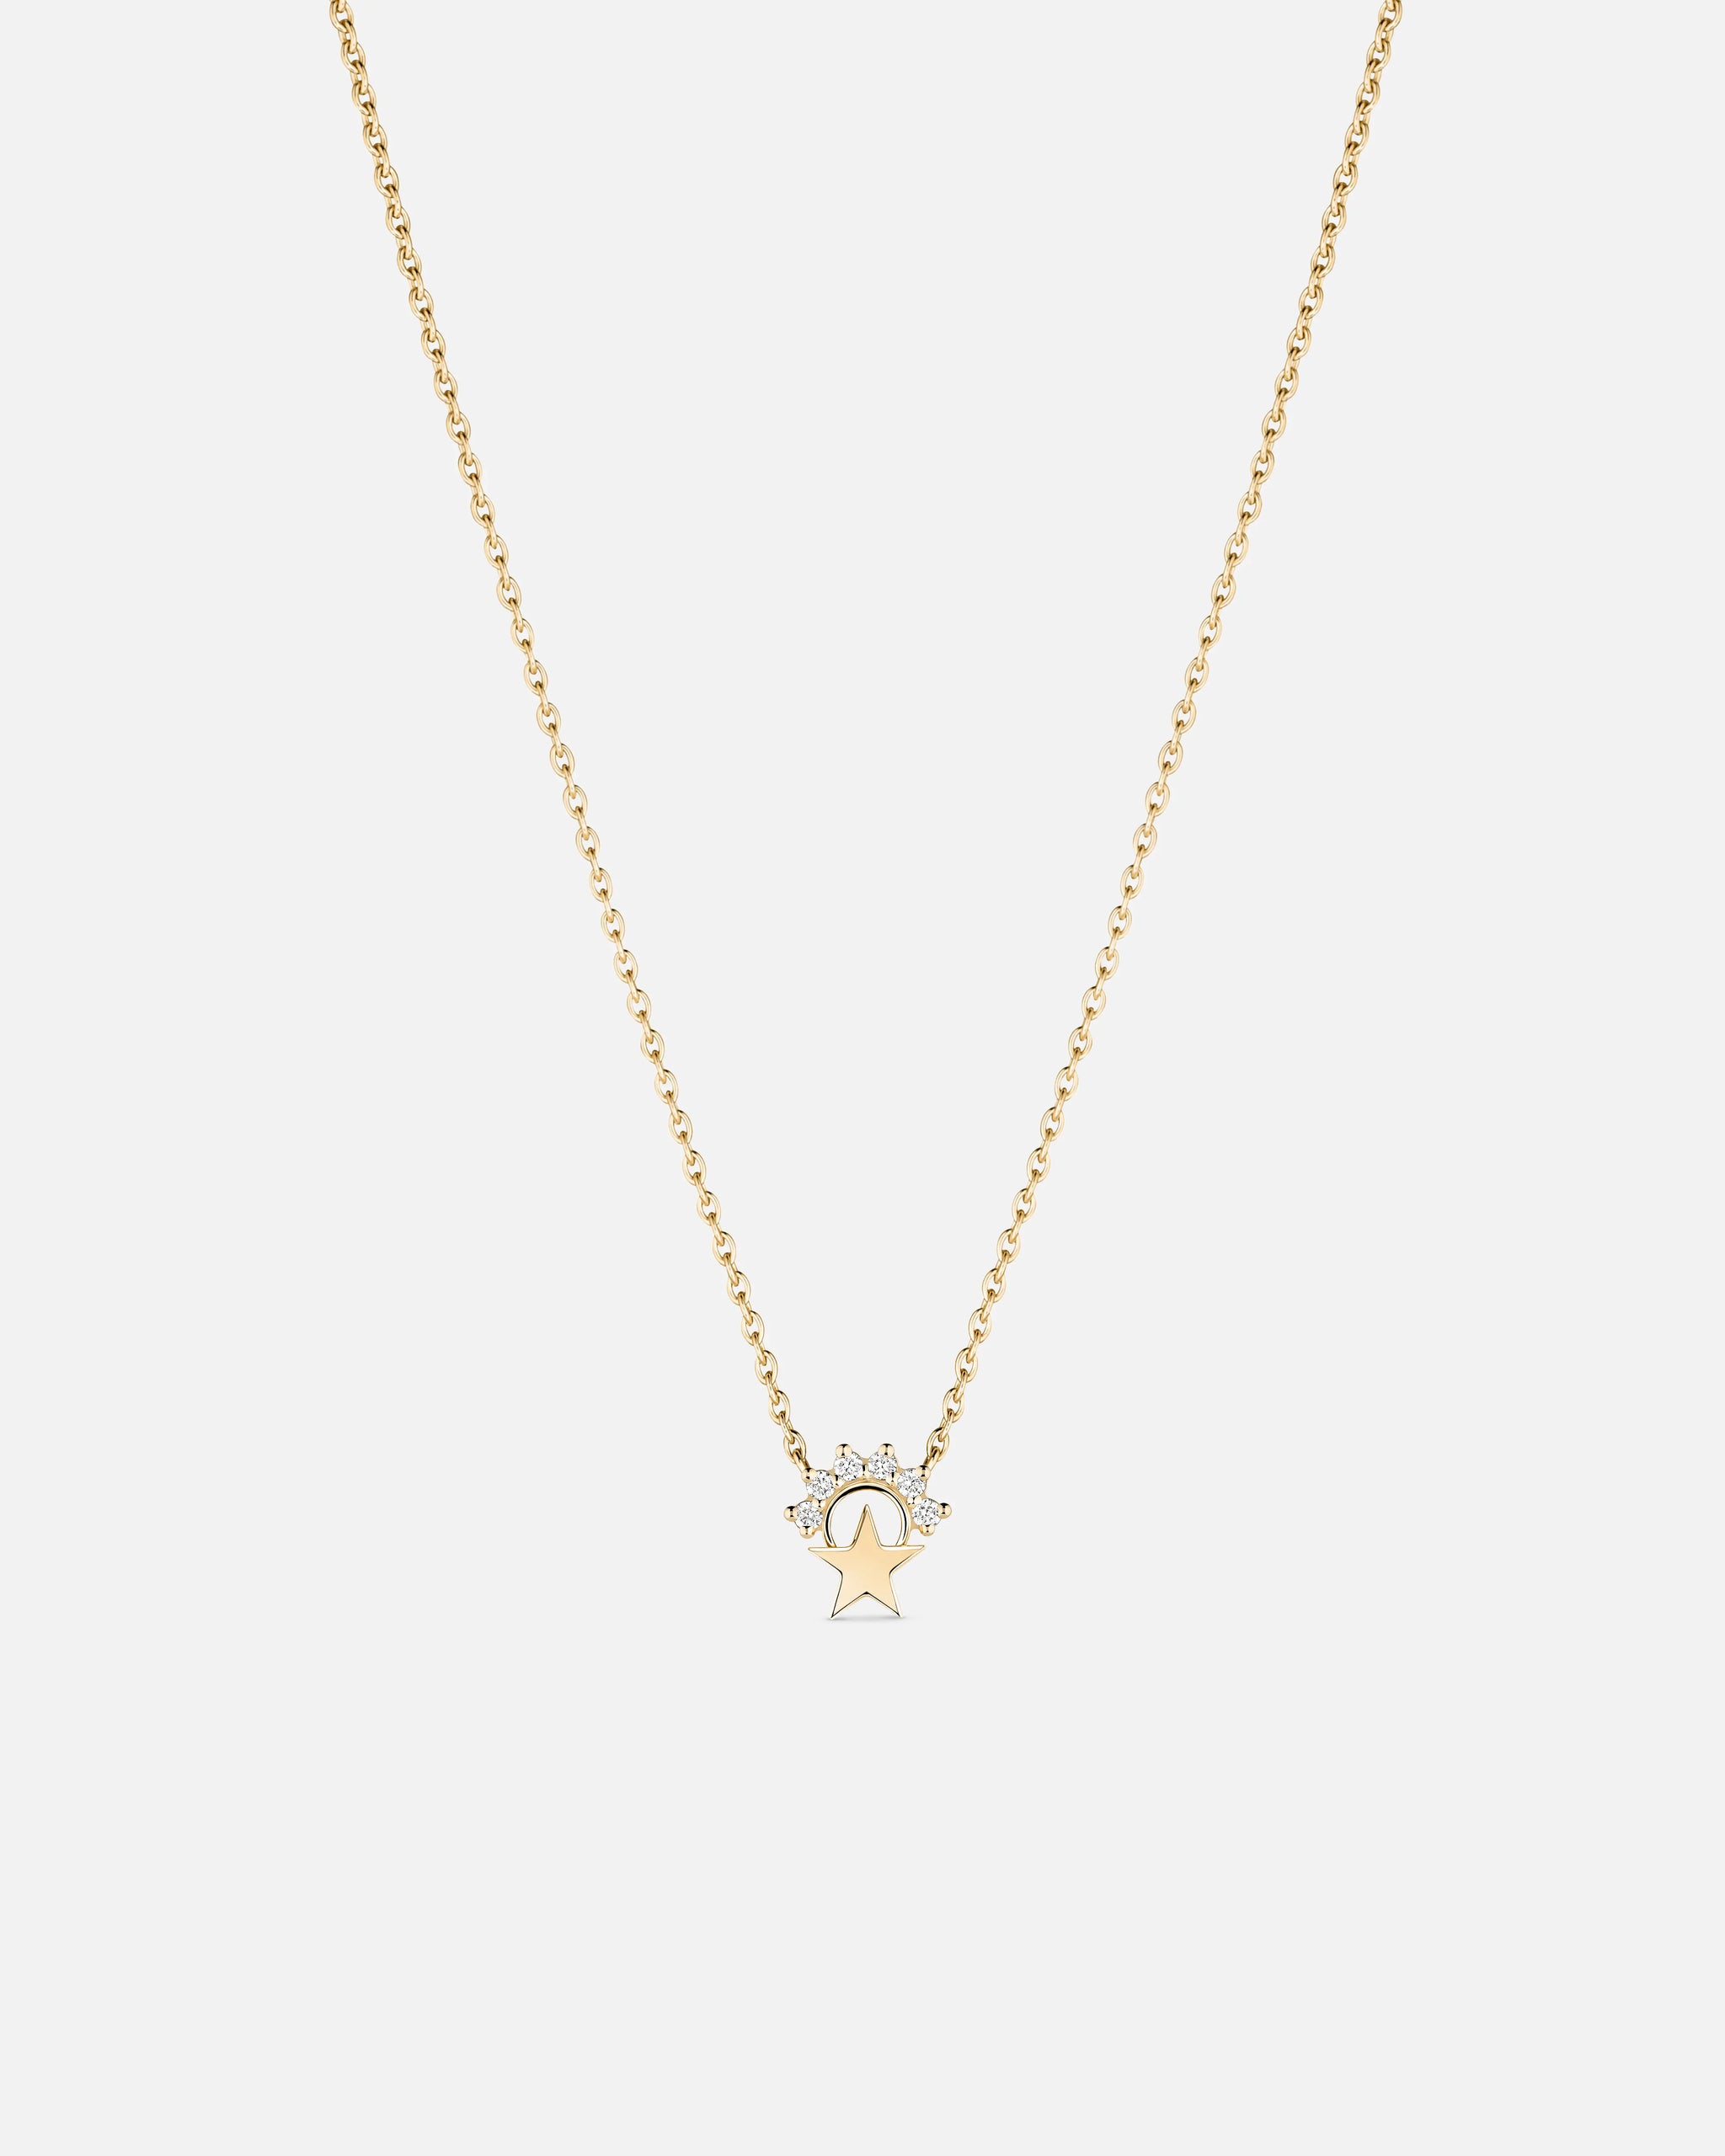 Small Star Pendant in Yellow Gold - 1 - Nouvel Heritage